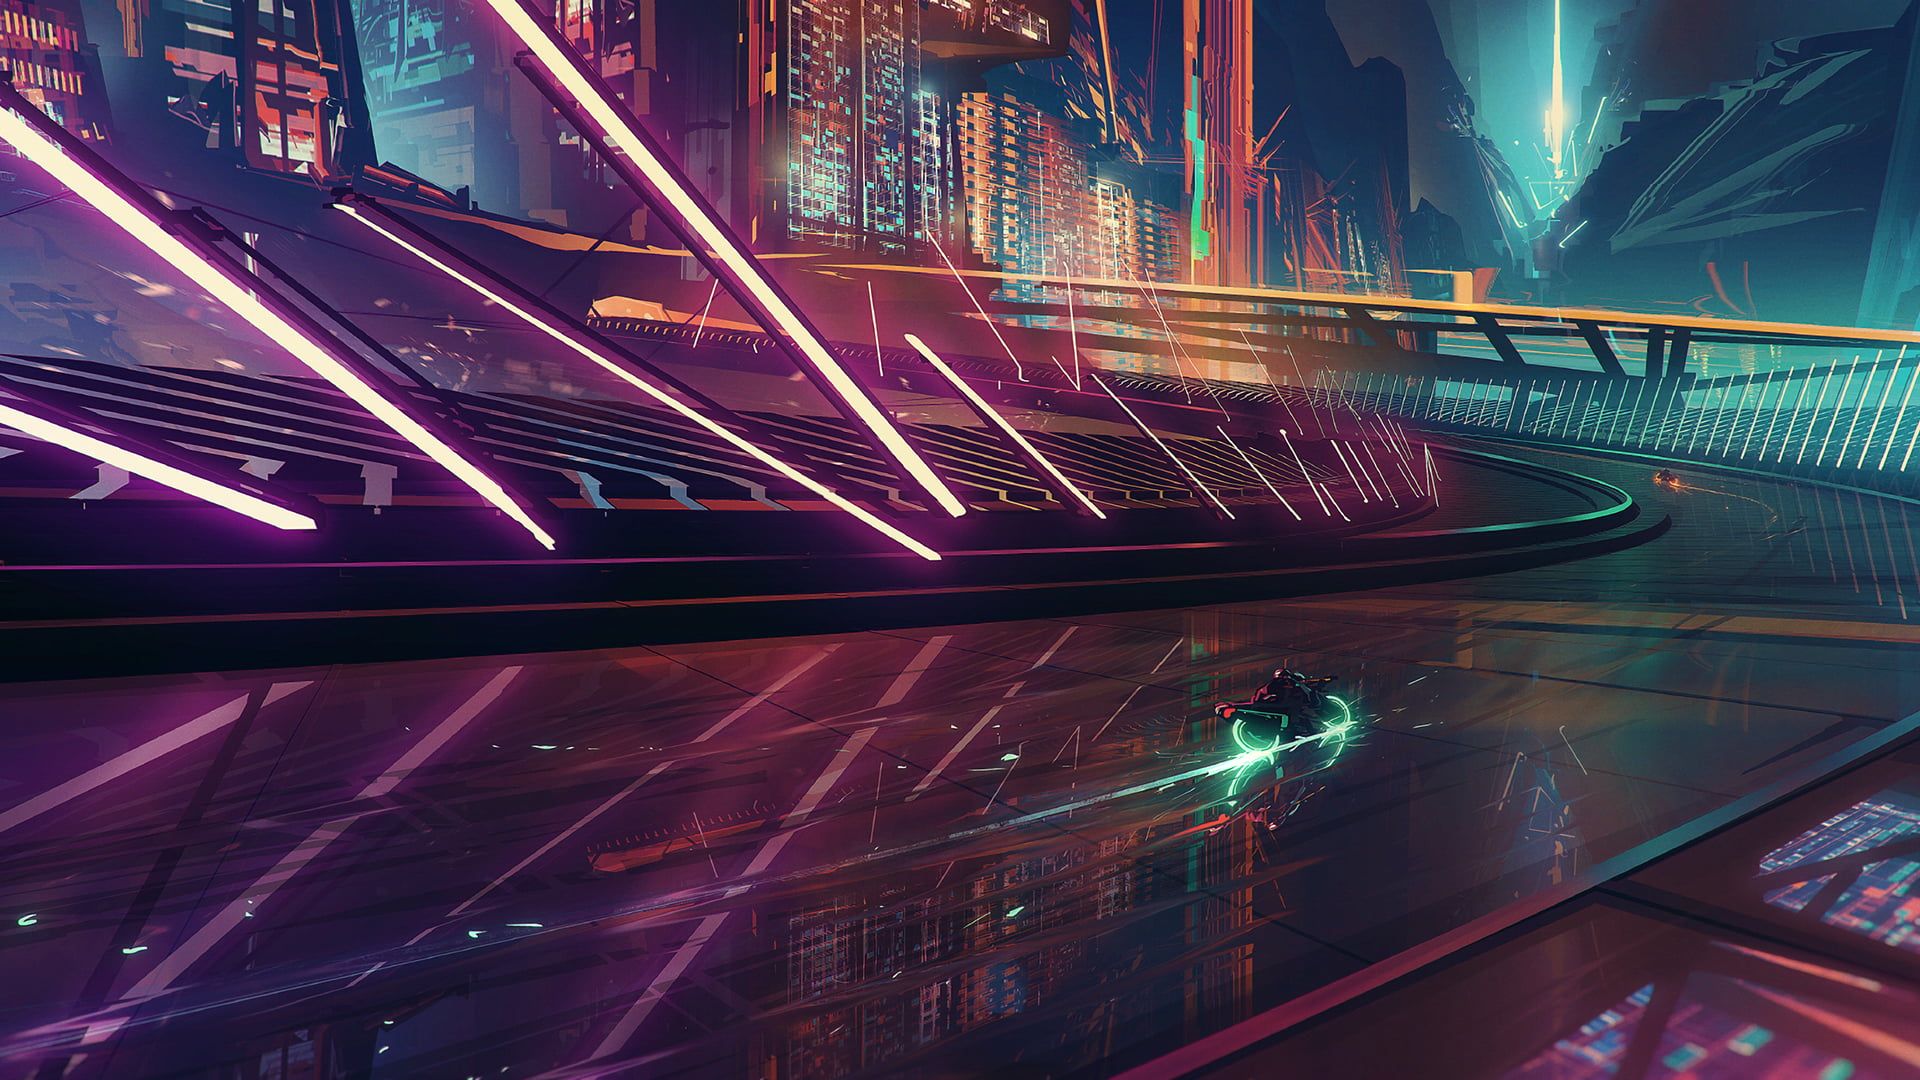 motorcycle wallpaper, time lapse photography of motorcycle on road during nighttime science fiction #cyberpun. Sci fi city, Time lapse photography, Cyberpunk city